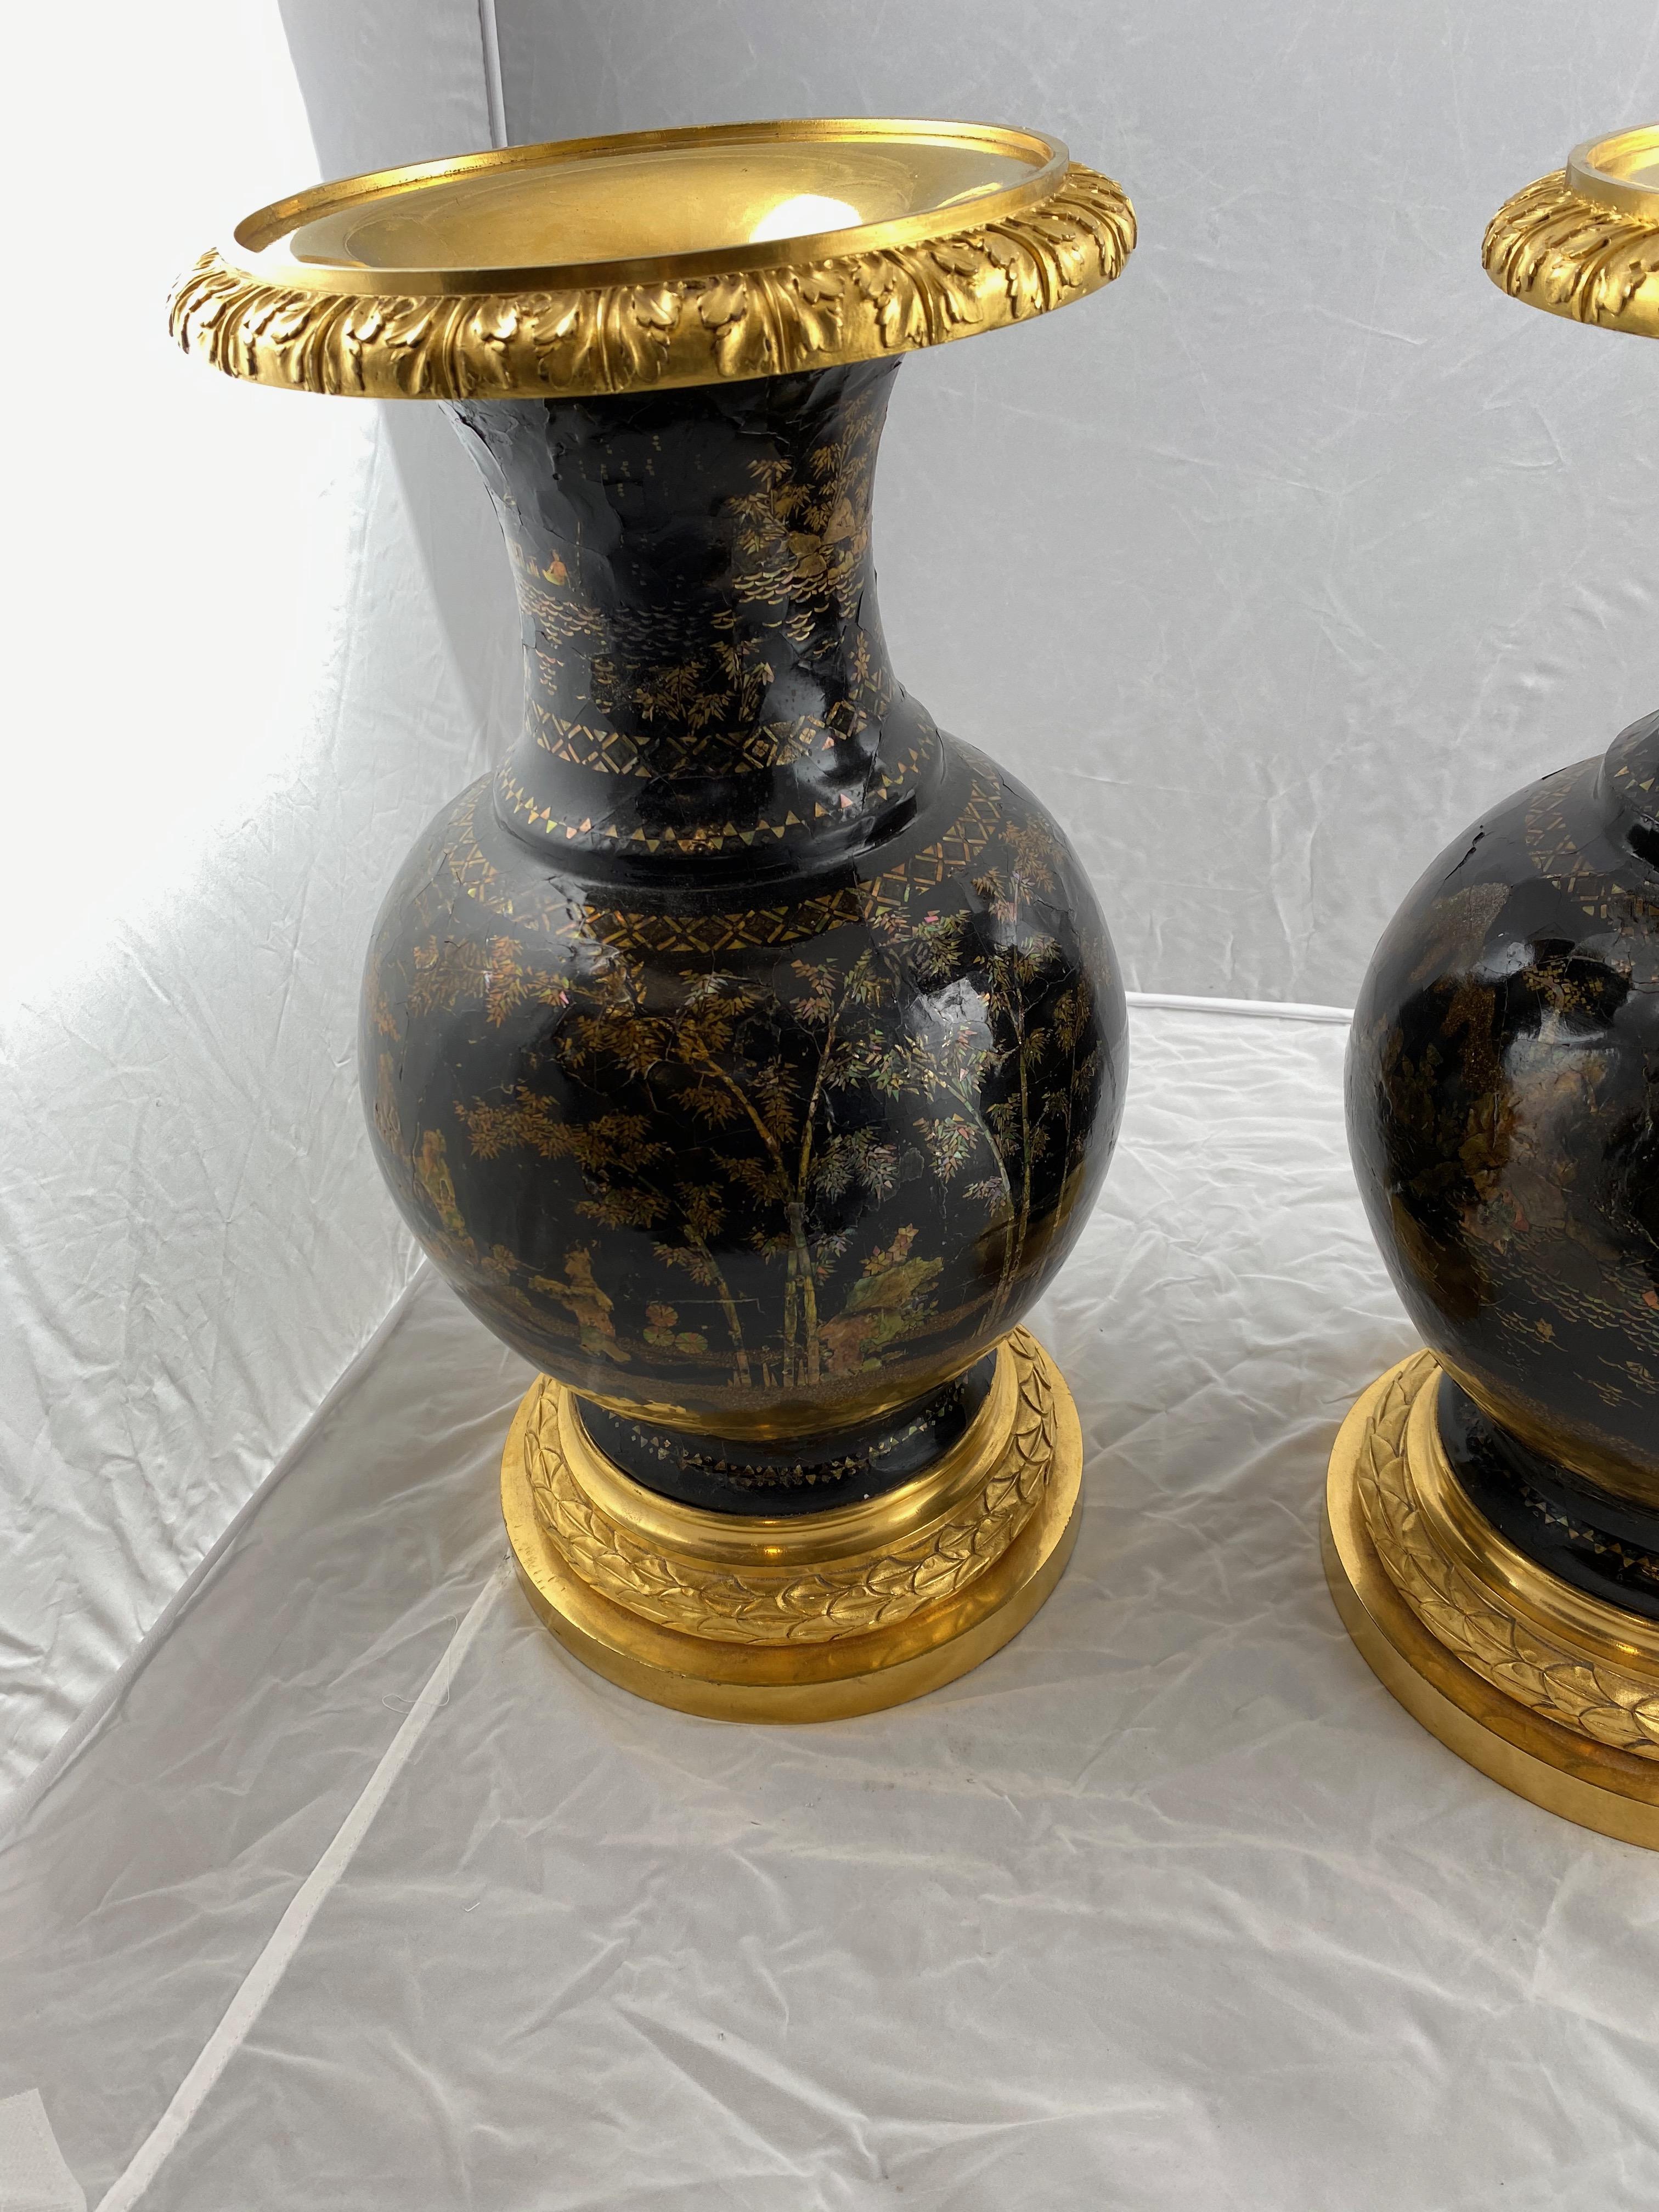 A large and fine pair of Chinese laquerurns mounted with gilt bronzes, mid-19th century.

Beautiful contrast with the gilt bronze against the black lacquer.